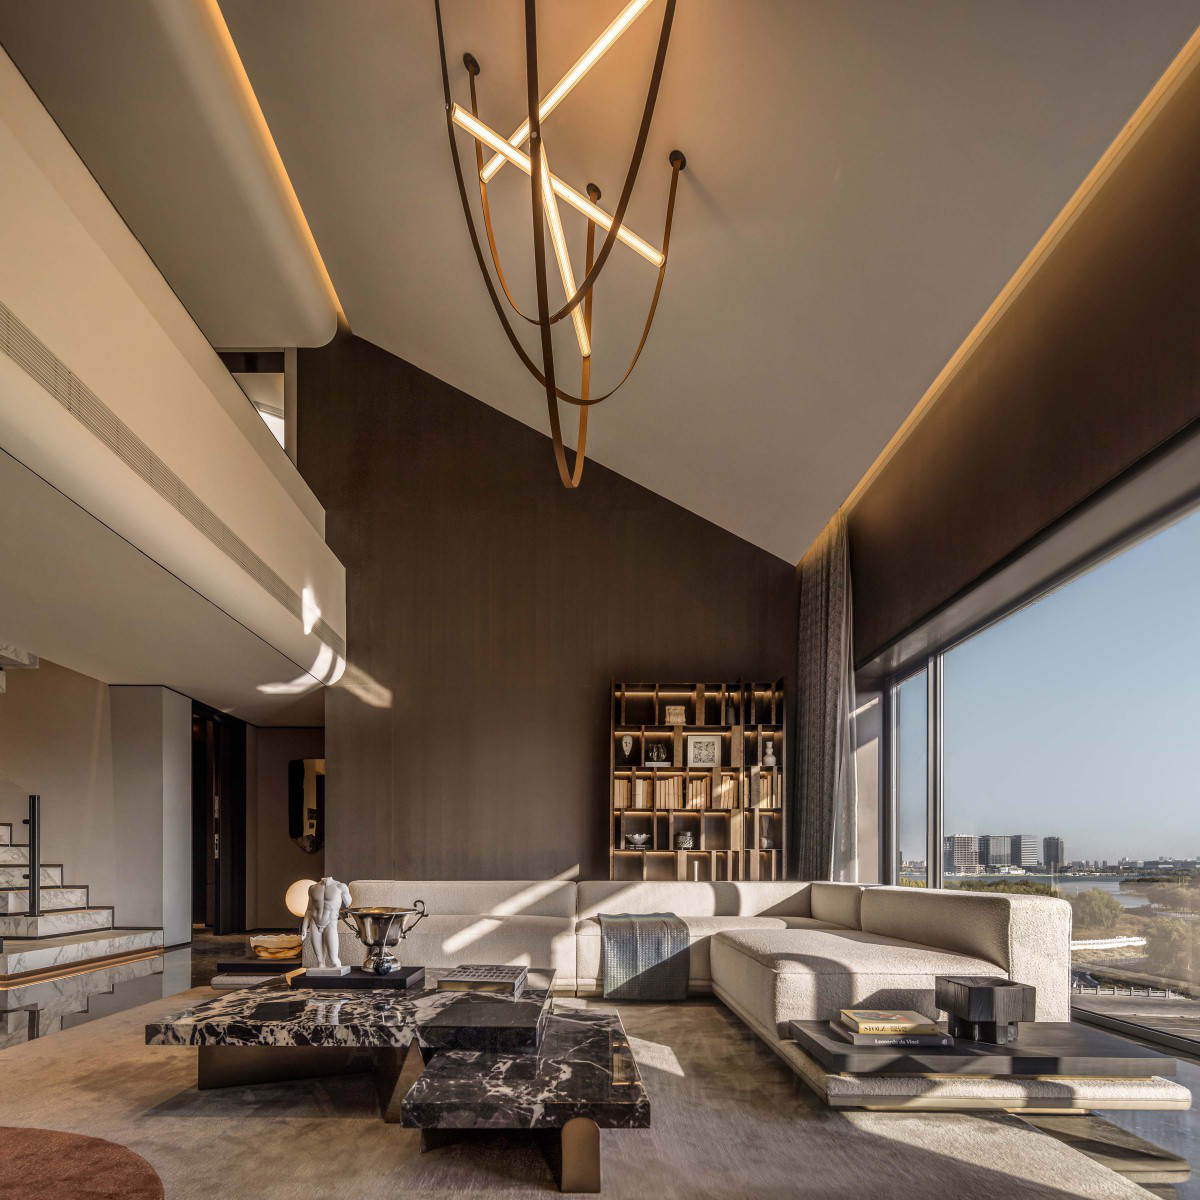 Robin, Wang wins Bronze at the prestigious A' Interior Space, Retail and Exhibition Design Award with Zhengzhou Poly Puyue Duplex Showflat interior design.